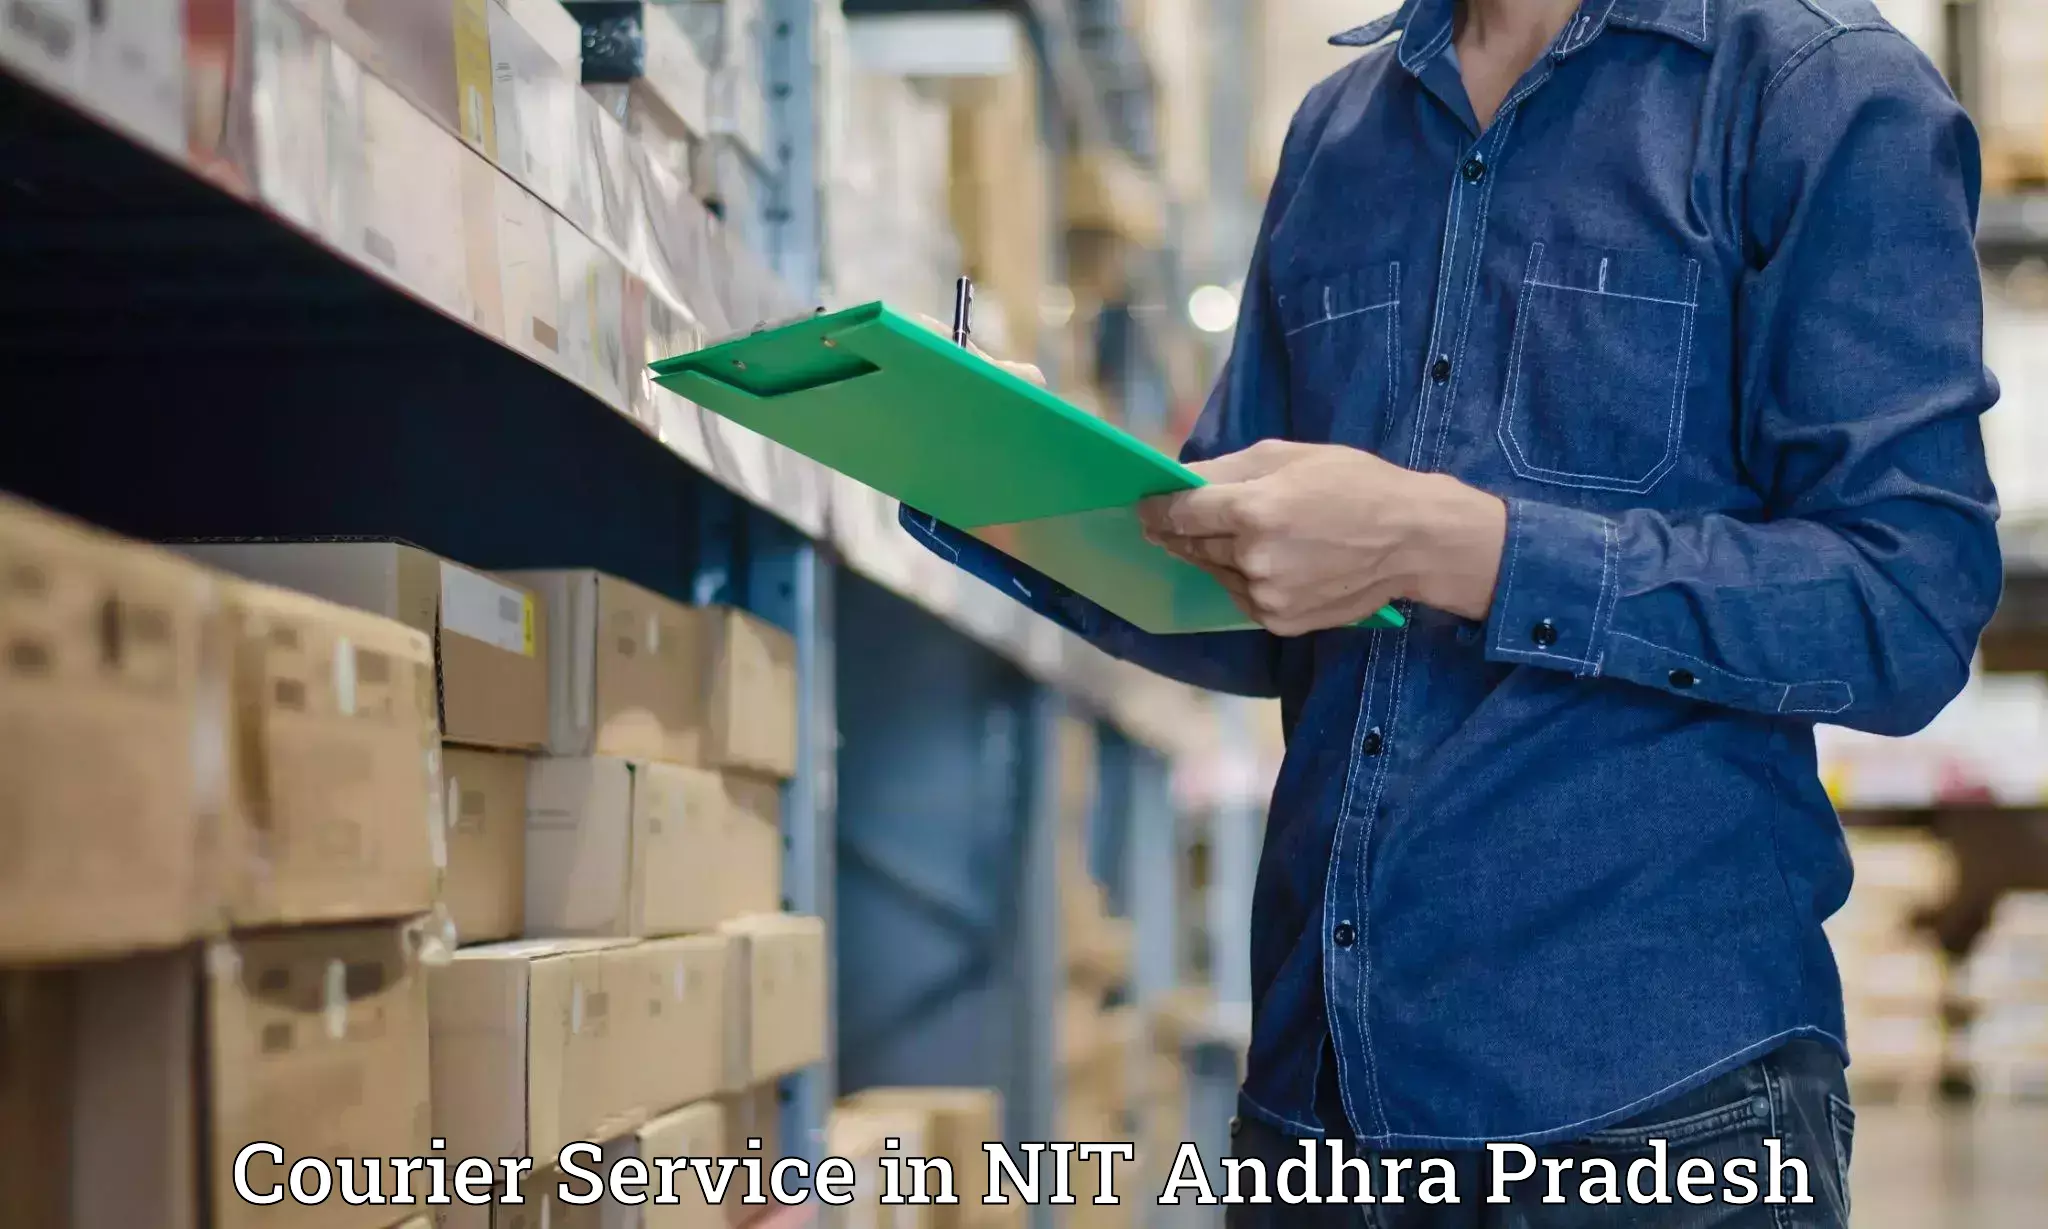 Professional parcel services in NIT Andhra Pradesh